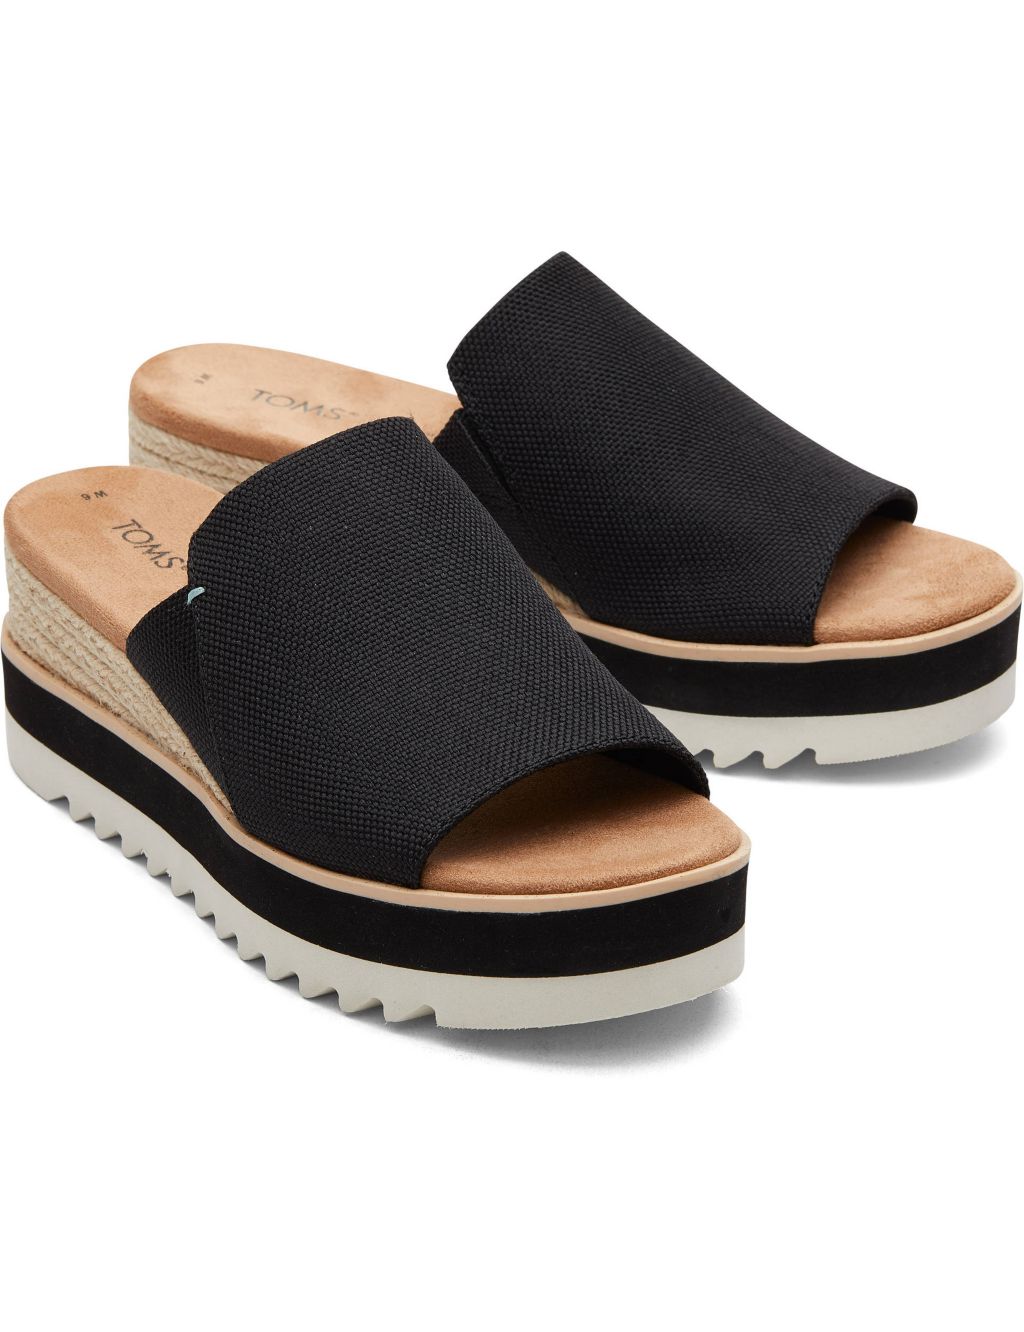 Canvas Wedge Mules image 3